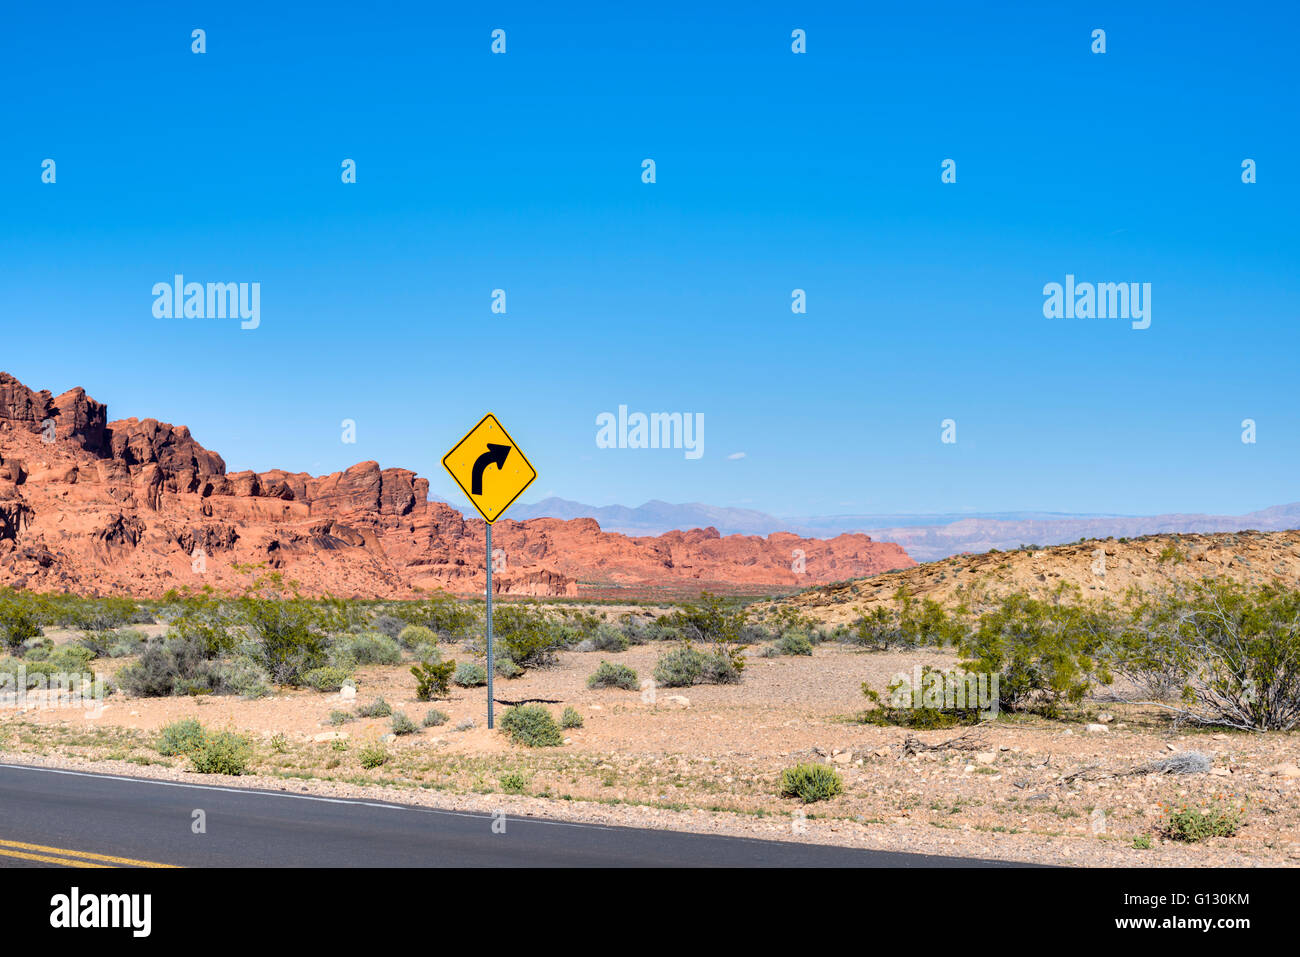 directional arrow sign, desert landscape. Valley of Fire State Park, Nevada. Stock Photo